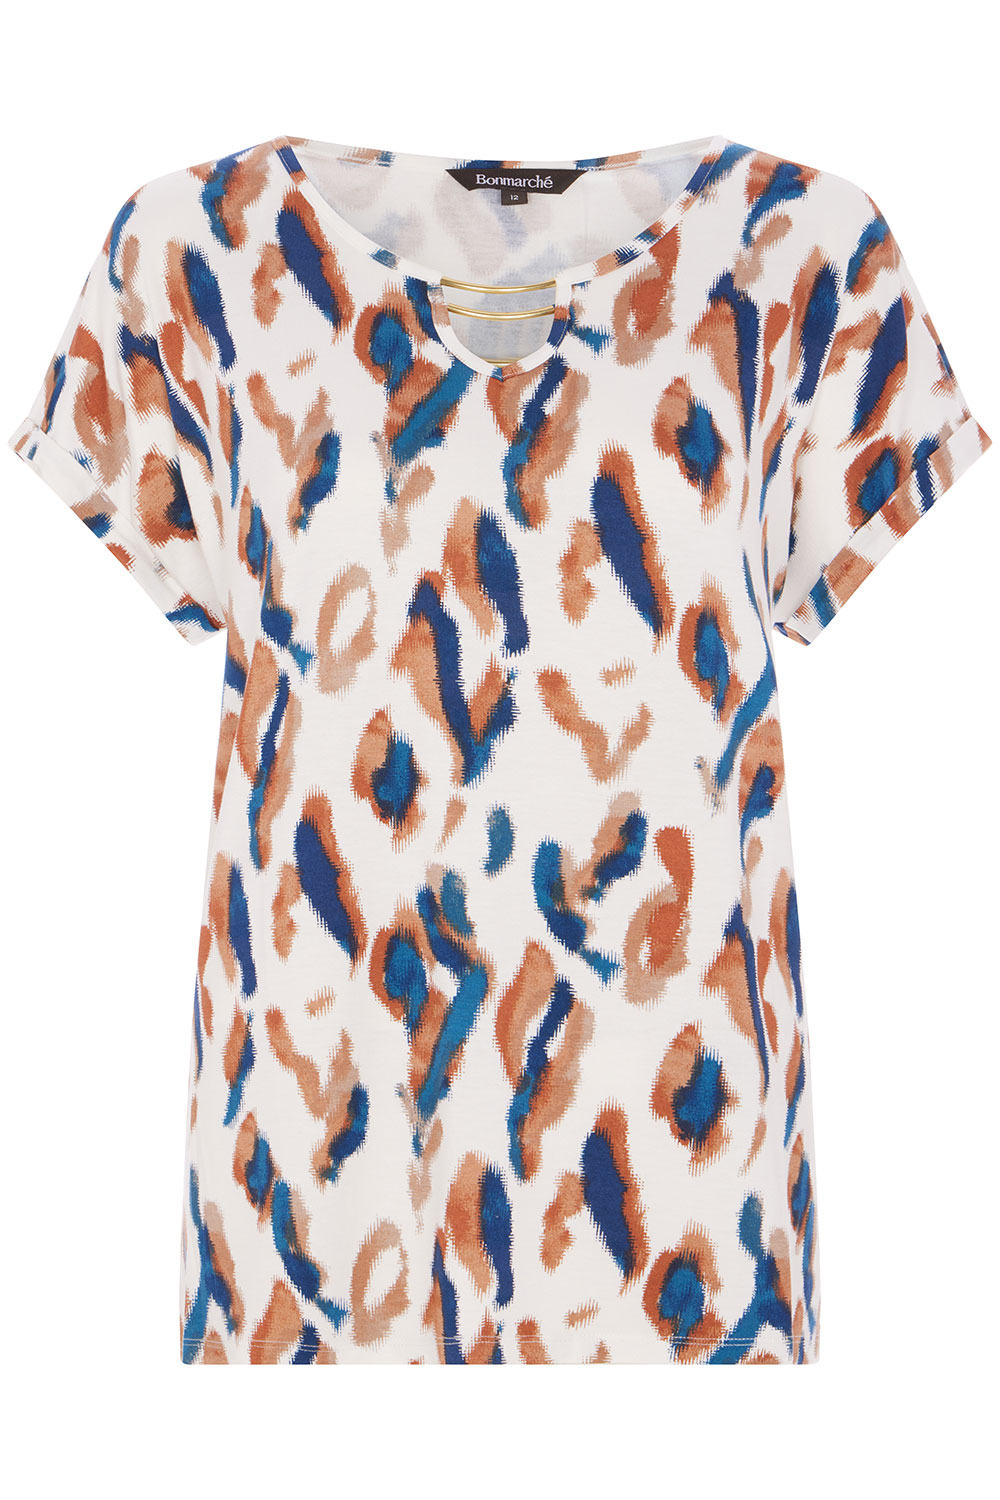 Short Sleeve Smudge Animal Print Top with Bar Detail | Bonmarché